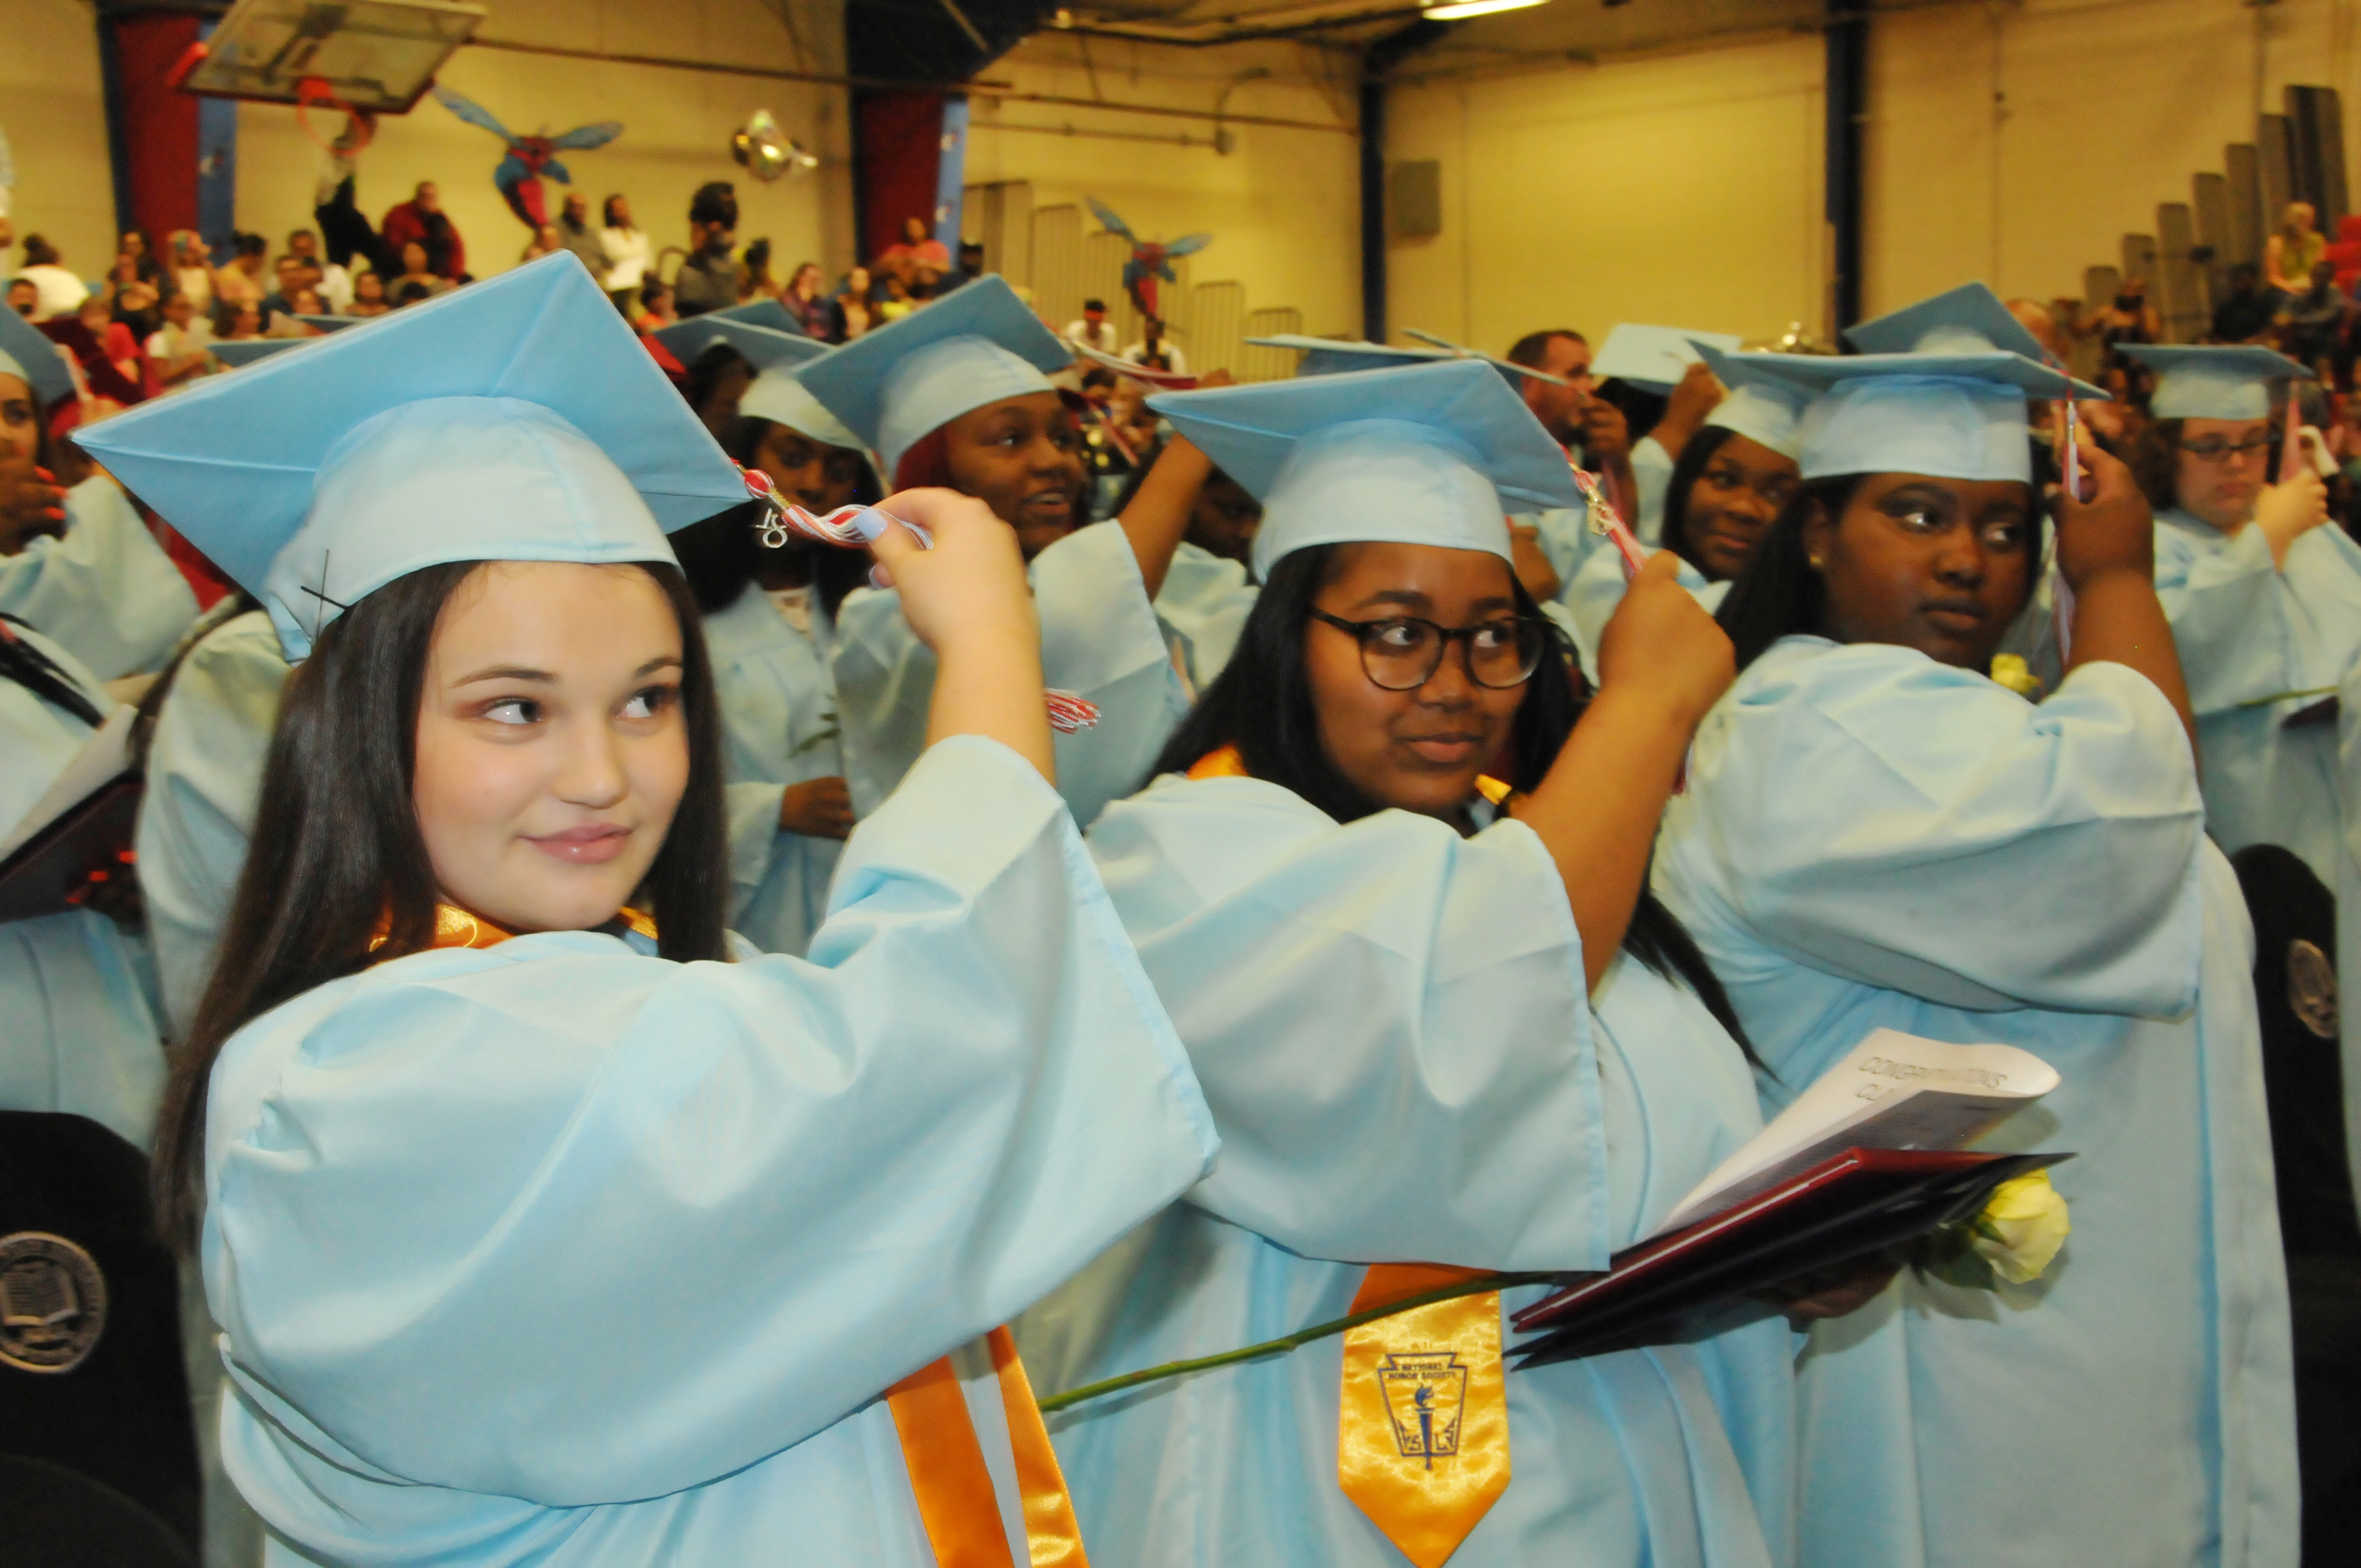 Members of the Class of 2018 turned their tassels as the traditional end to the first-ever commencement for the Early College High School.